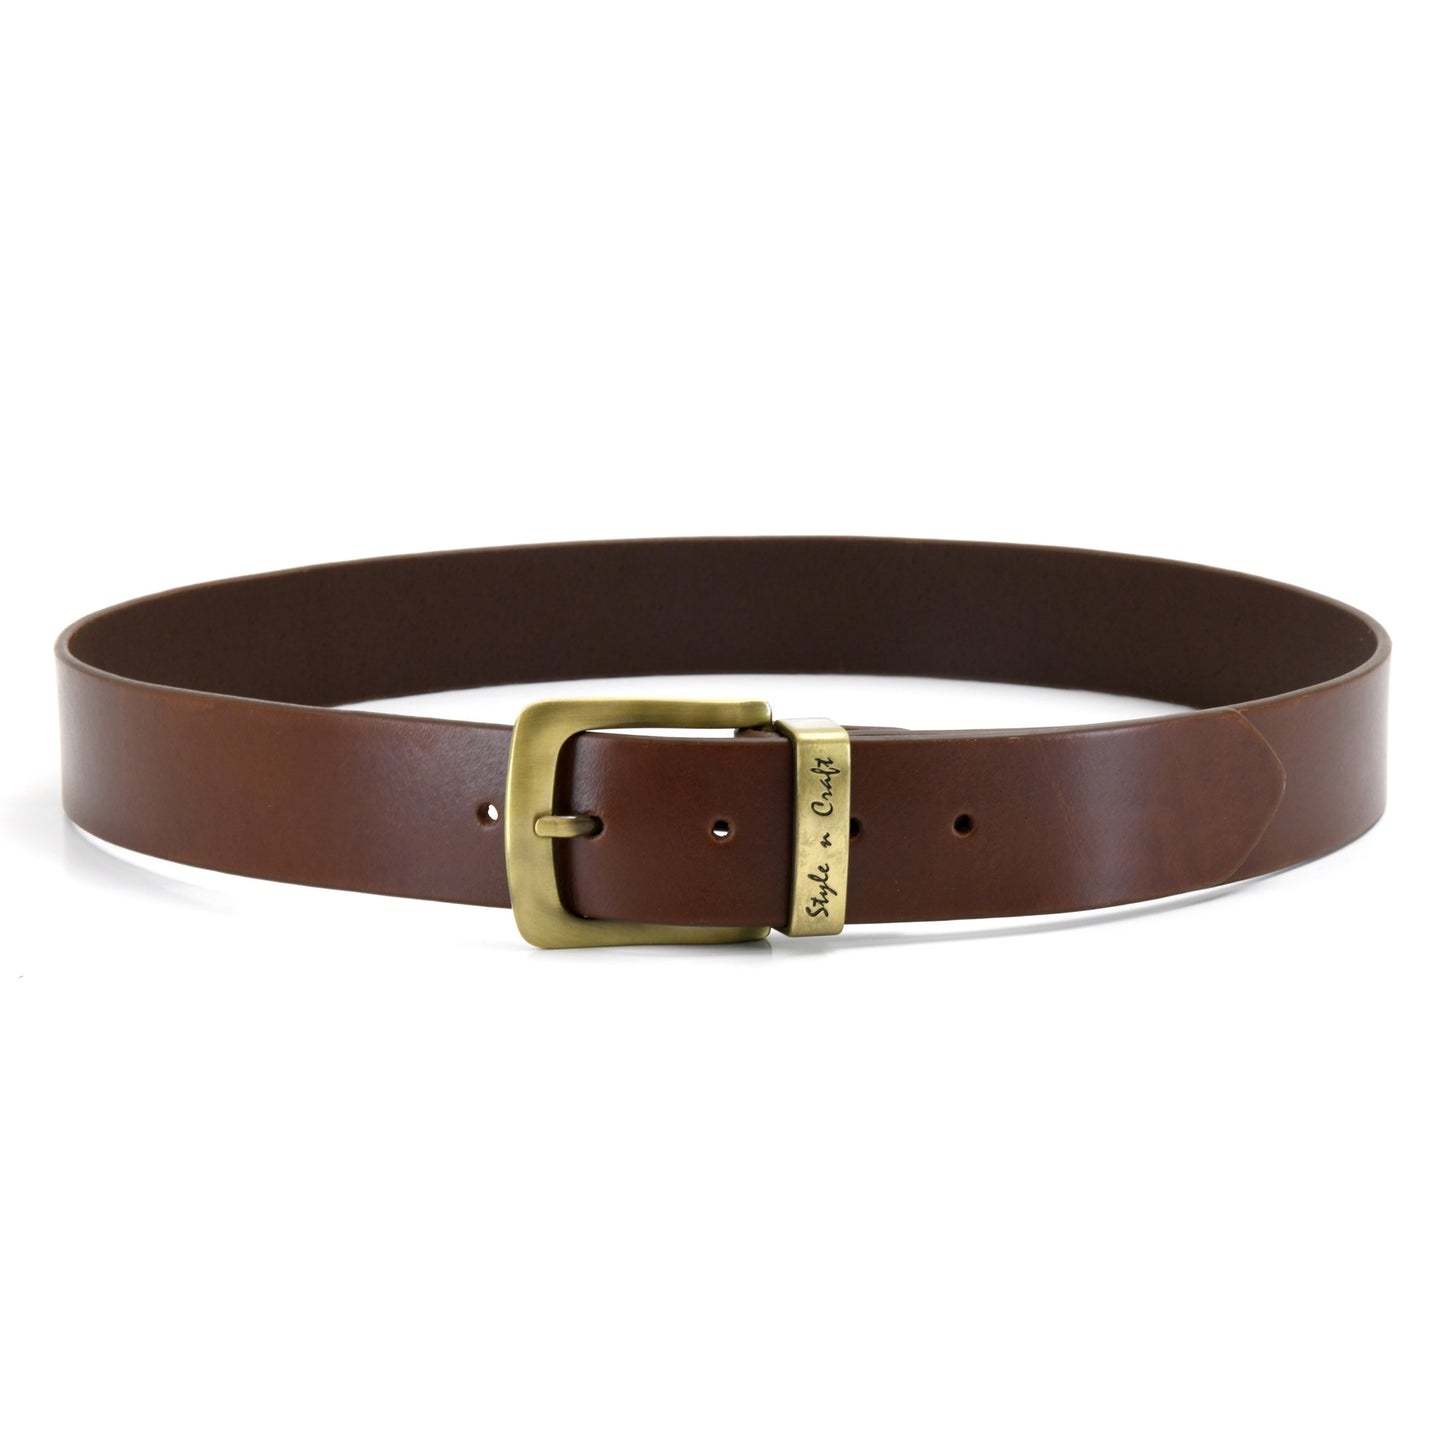 392713 - one and a half inch wide leather belt in dark tan color full grain leather with matte gold finish metal buckle & loop - front view 2